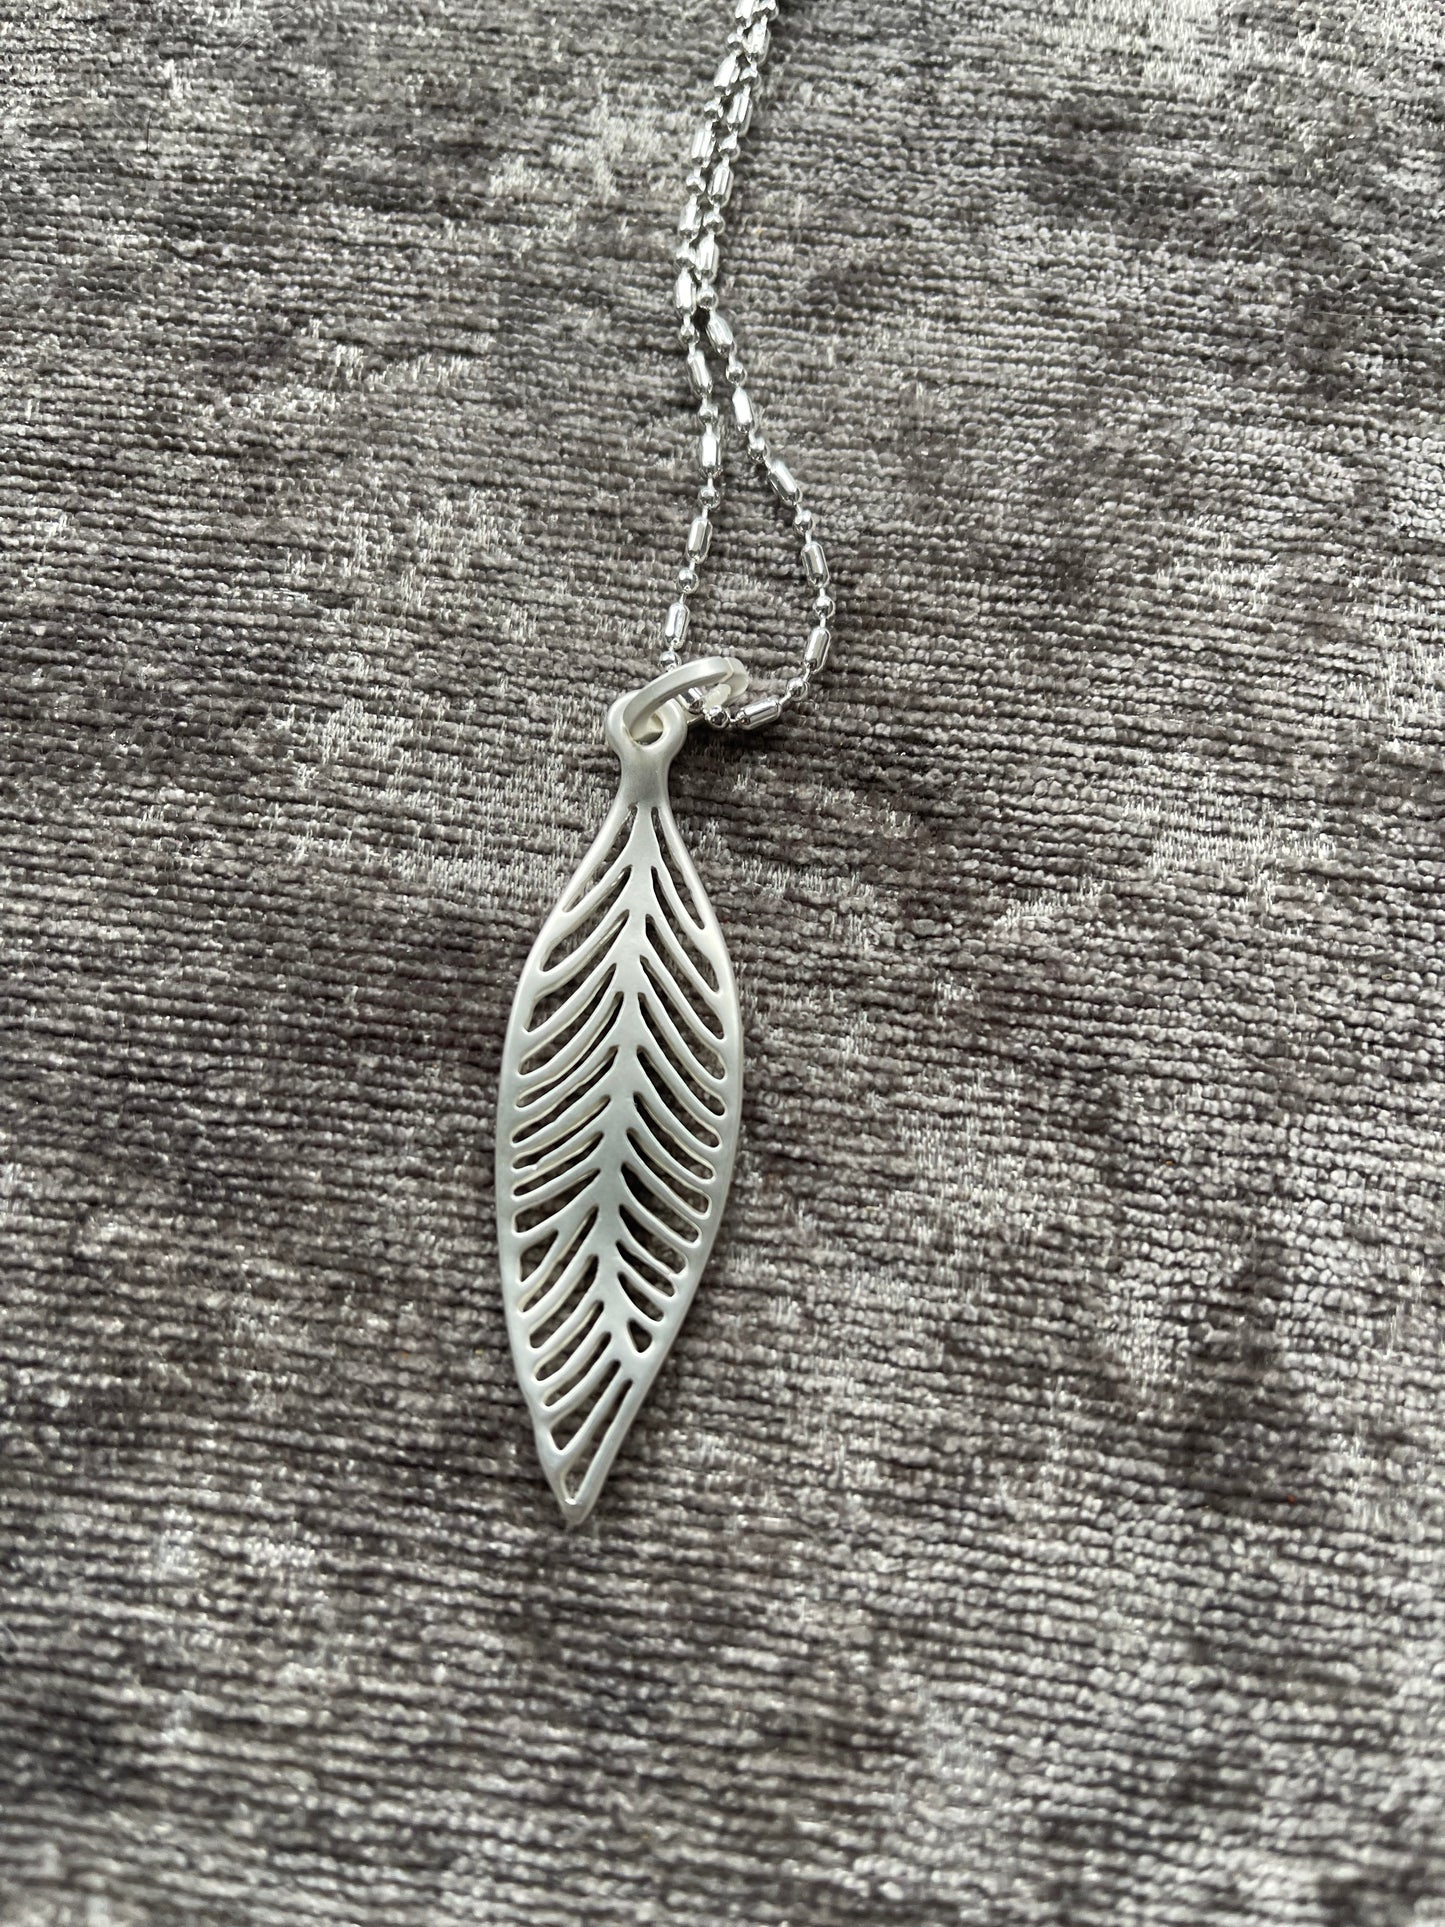 Feather Long Necklace